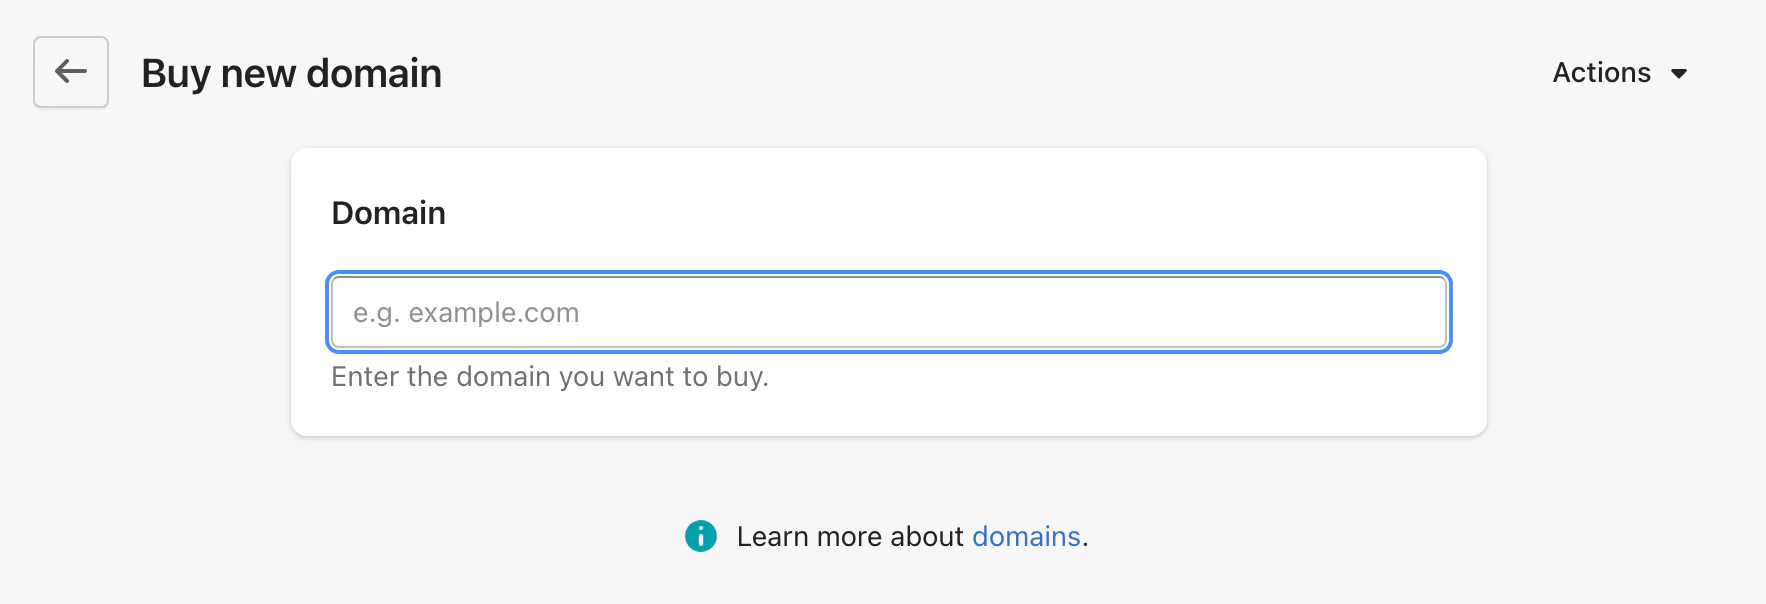 How to start a Shopify store: Register a domain